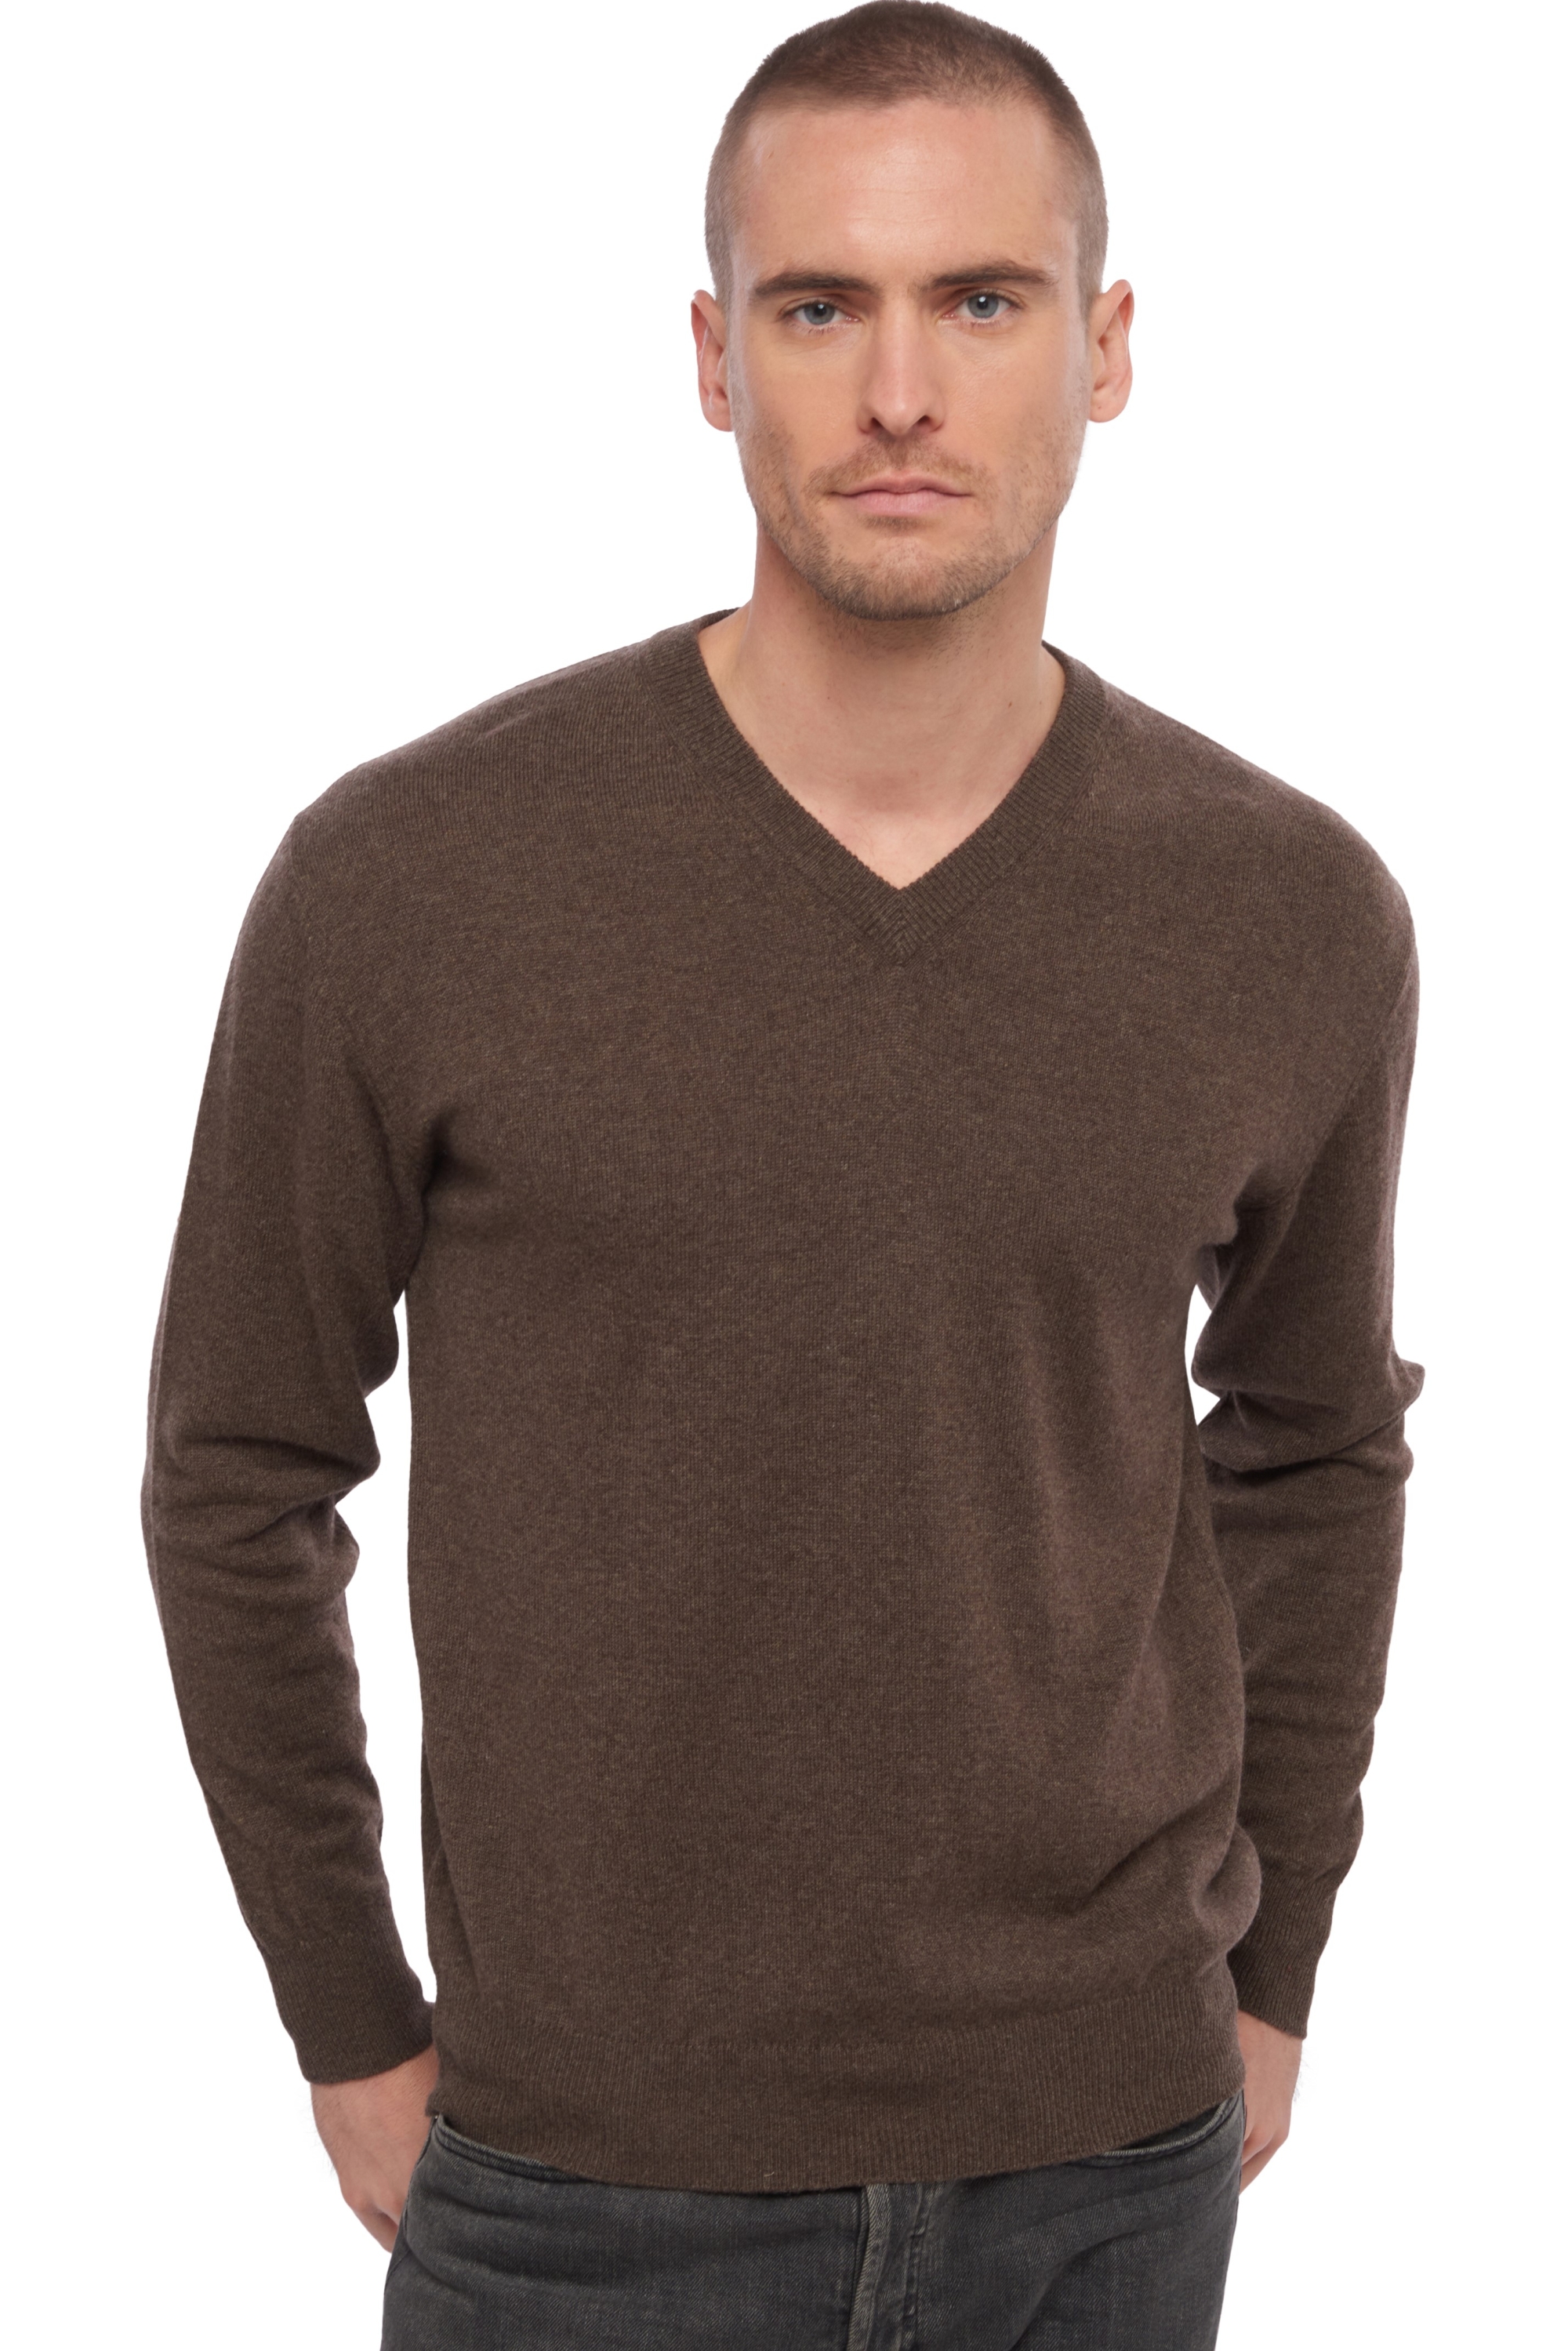 Cachemire pull homme hippolyte marron chine 3xl